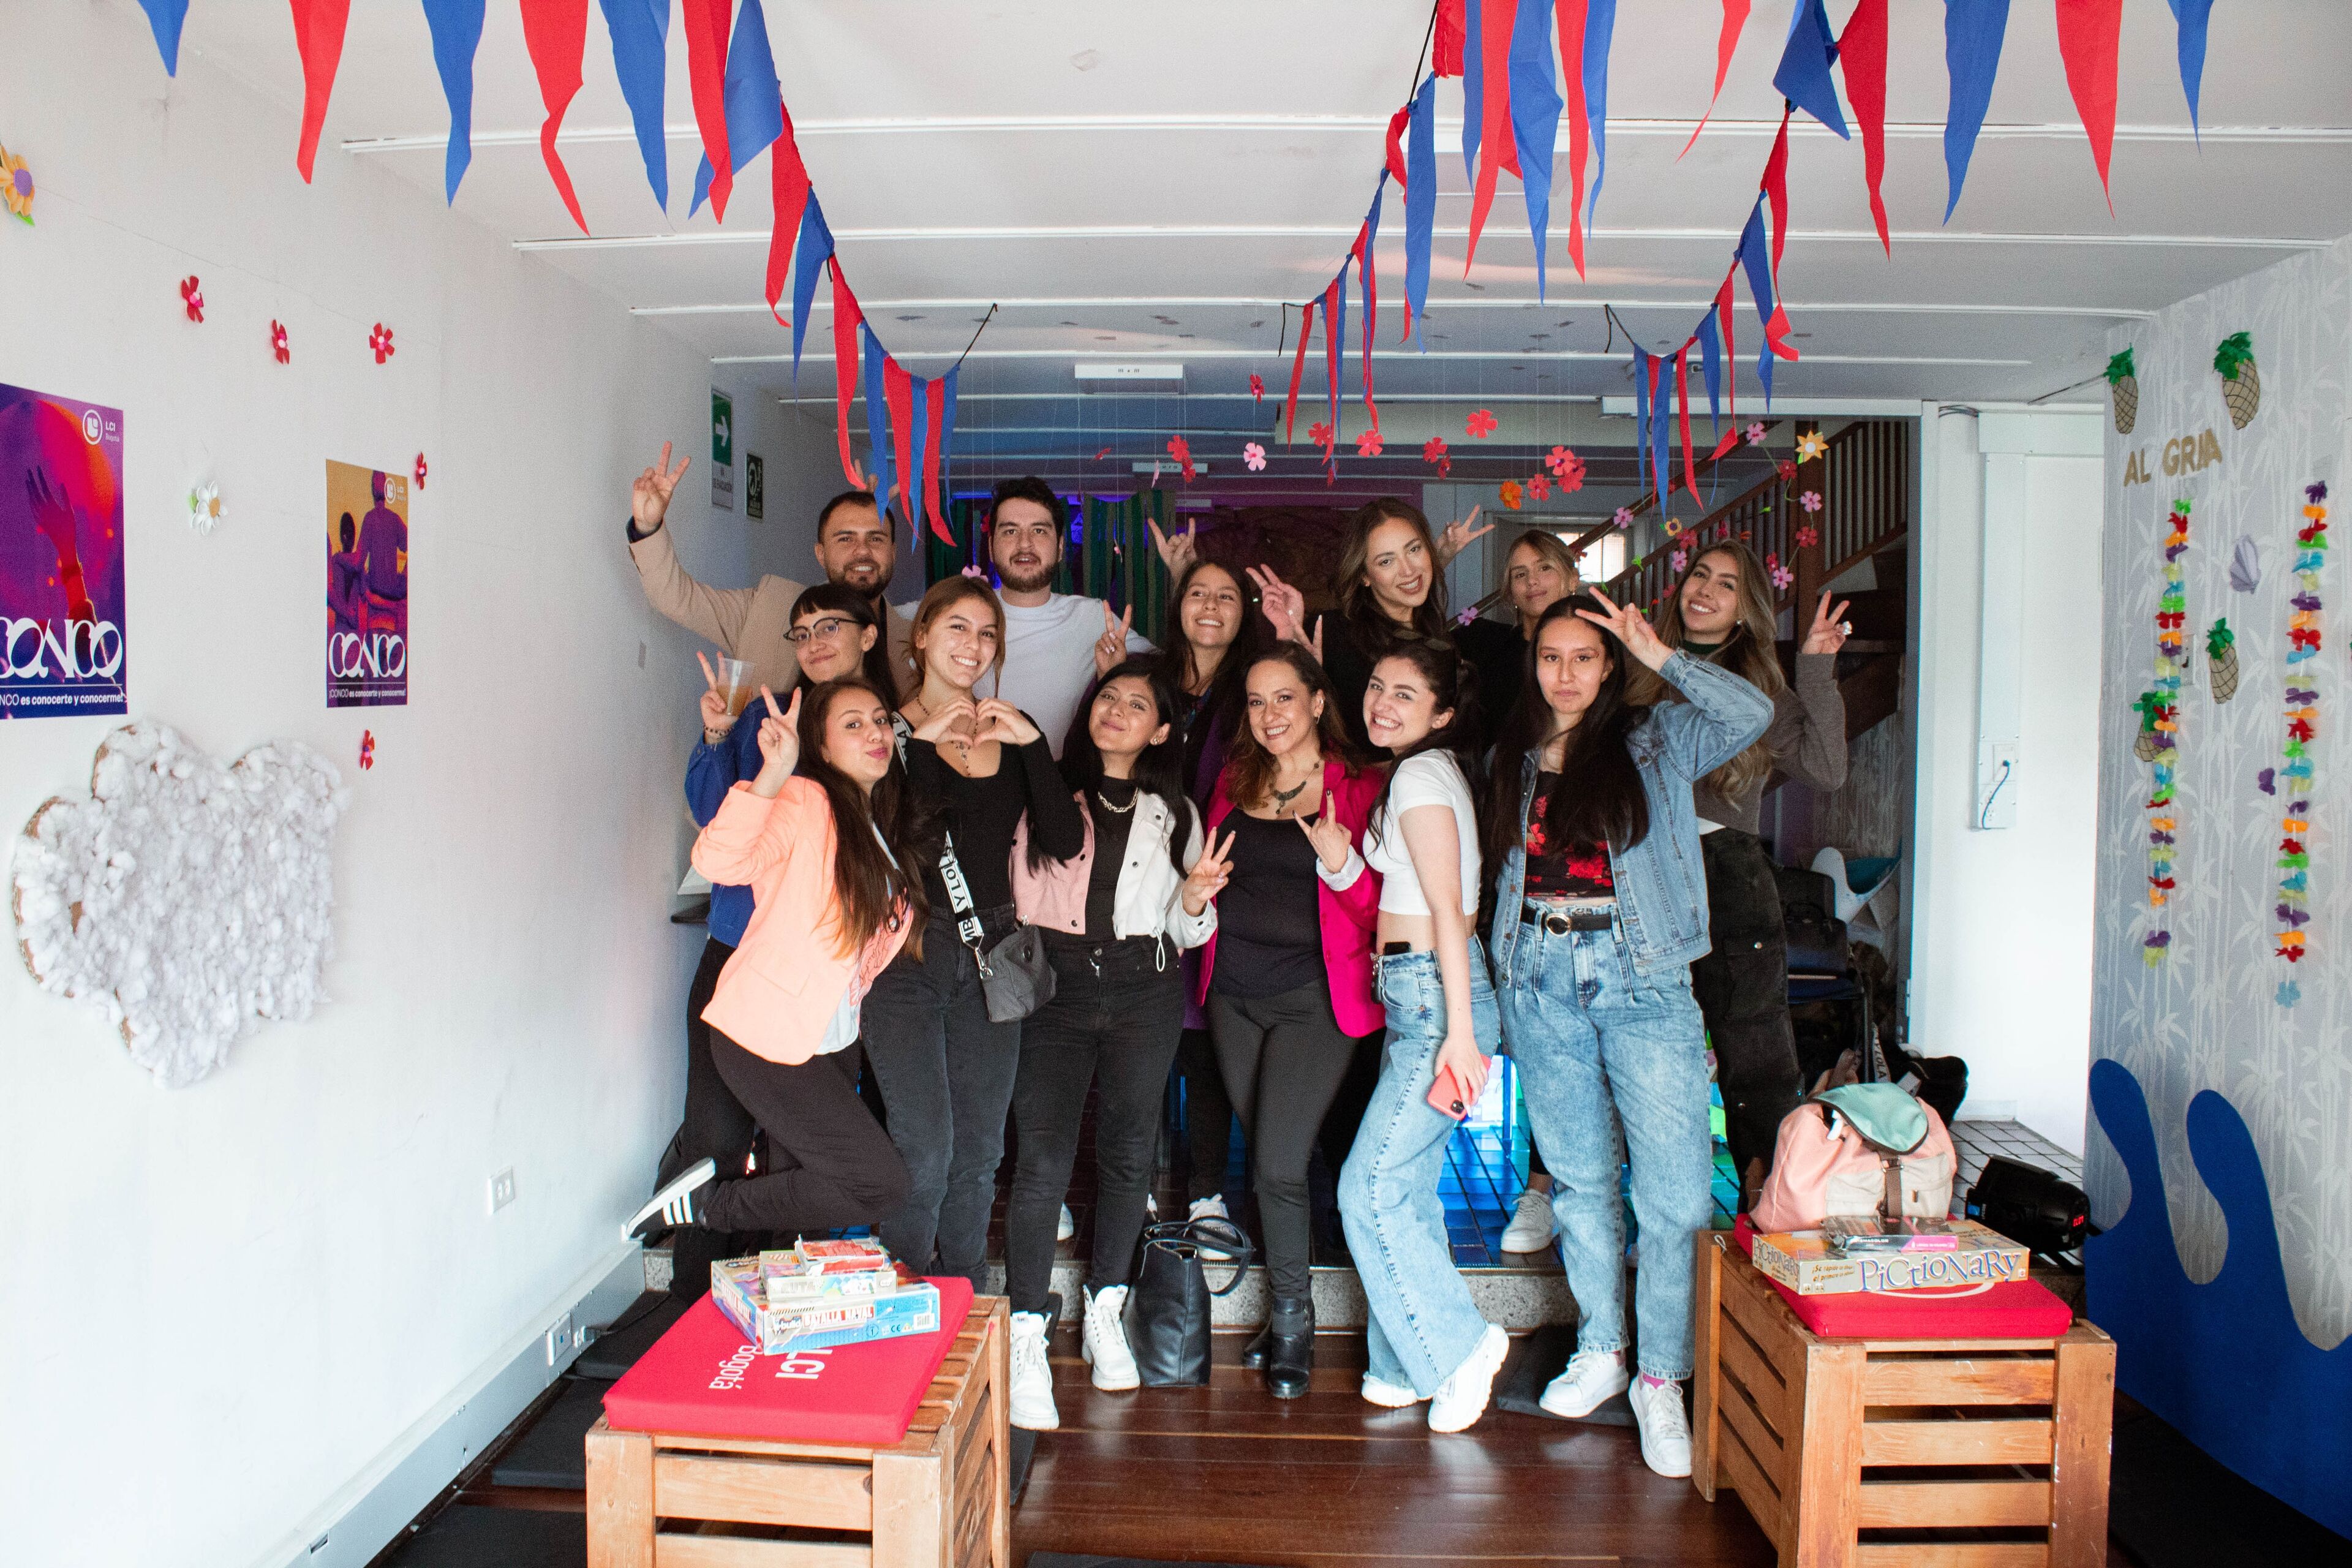 A group of cheerful colleagues posing at a festive office party, decorated with colorful streamers and flags.